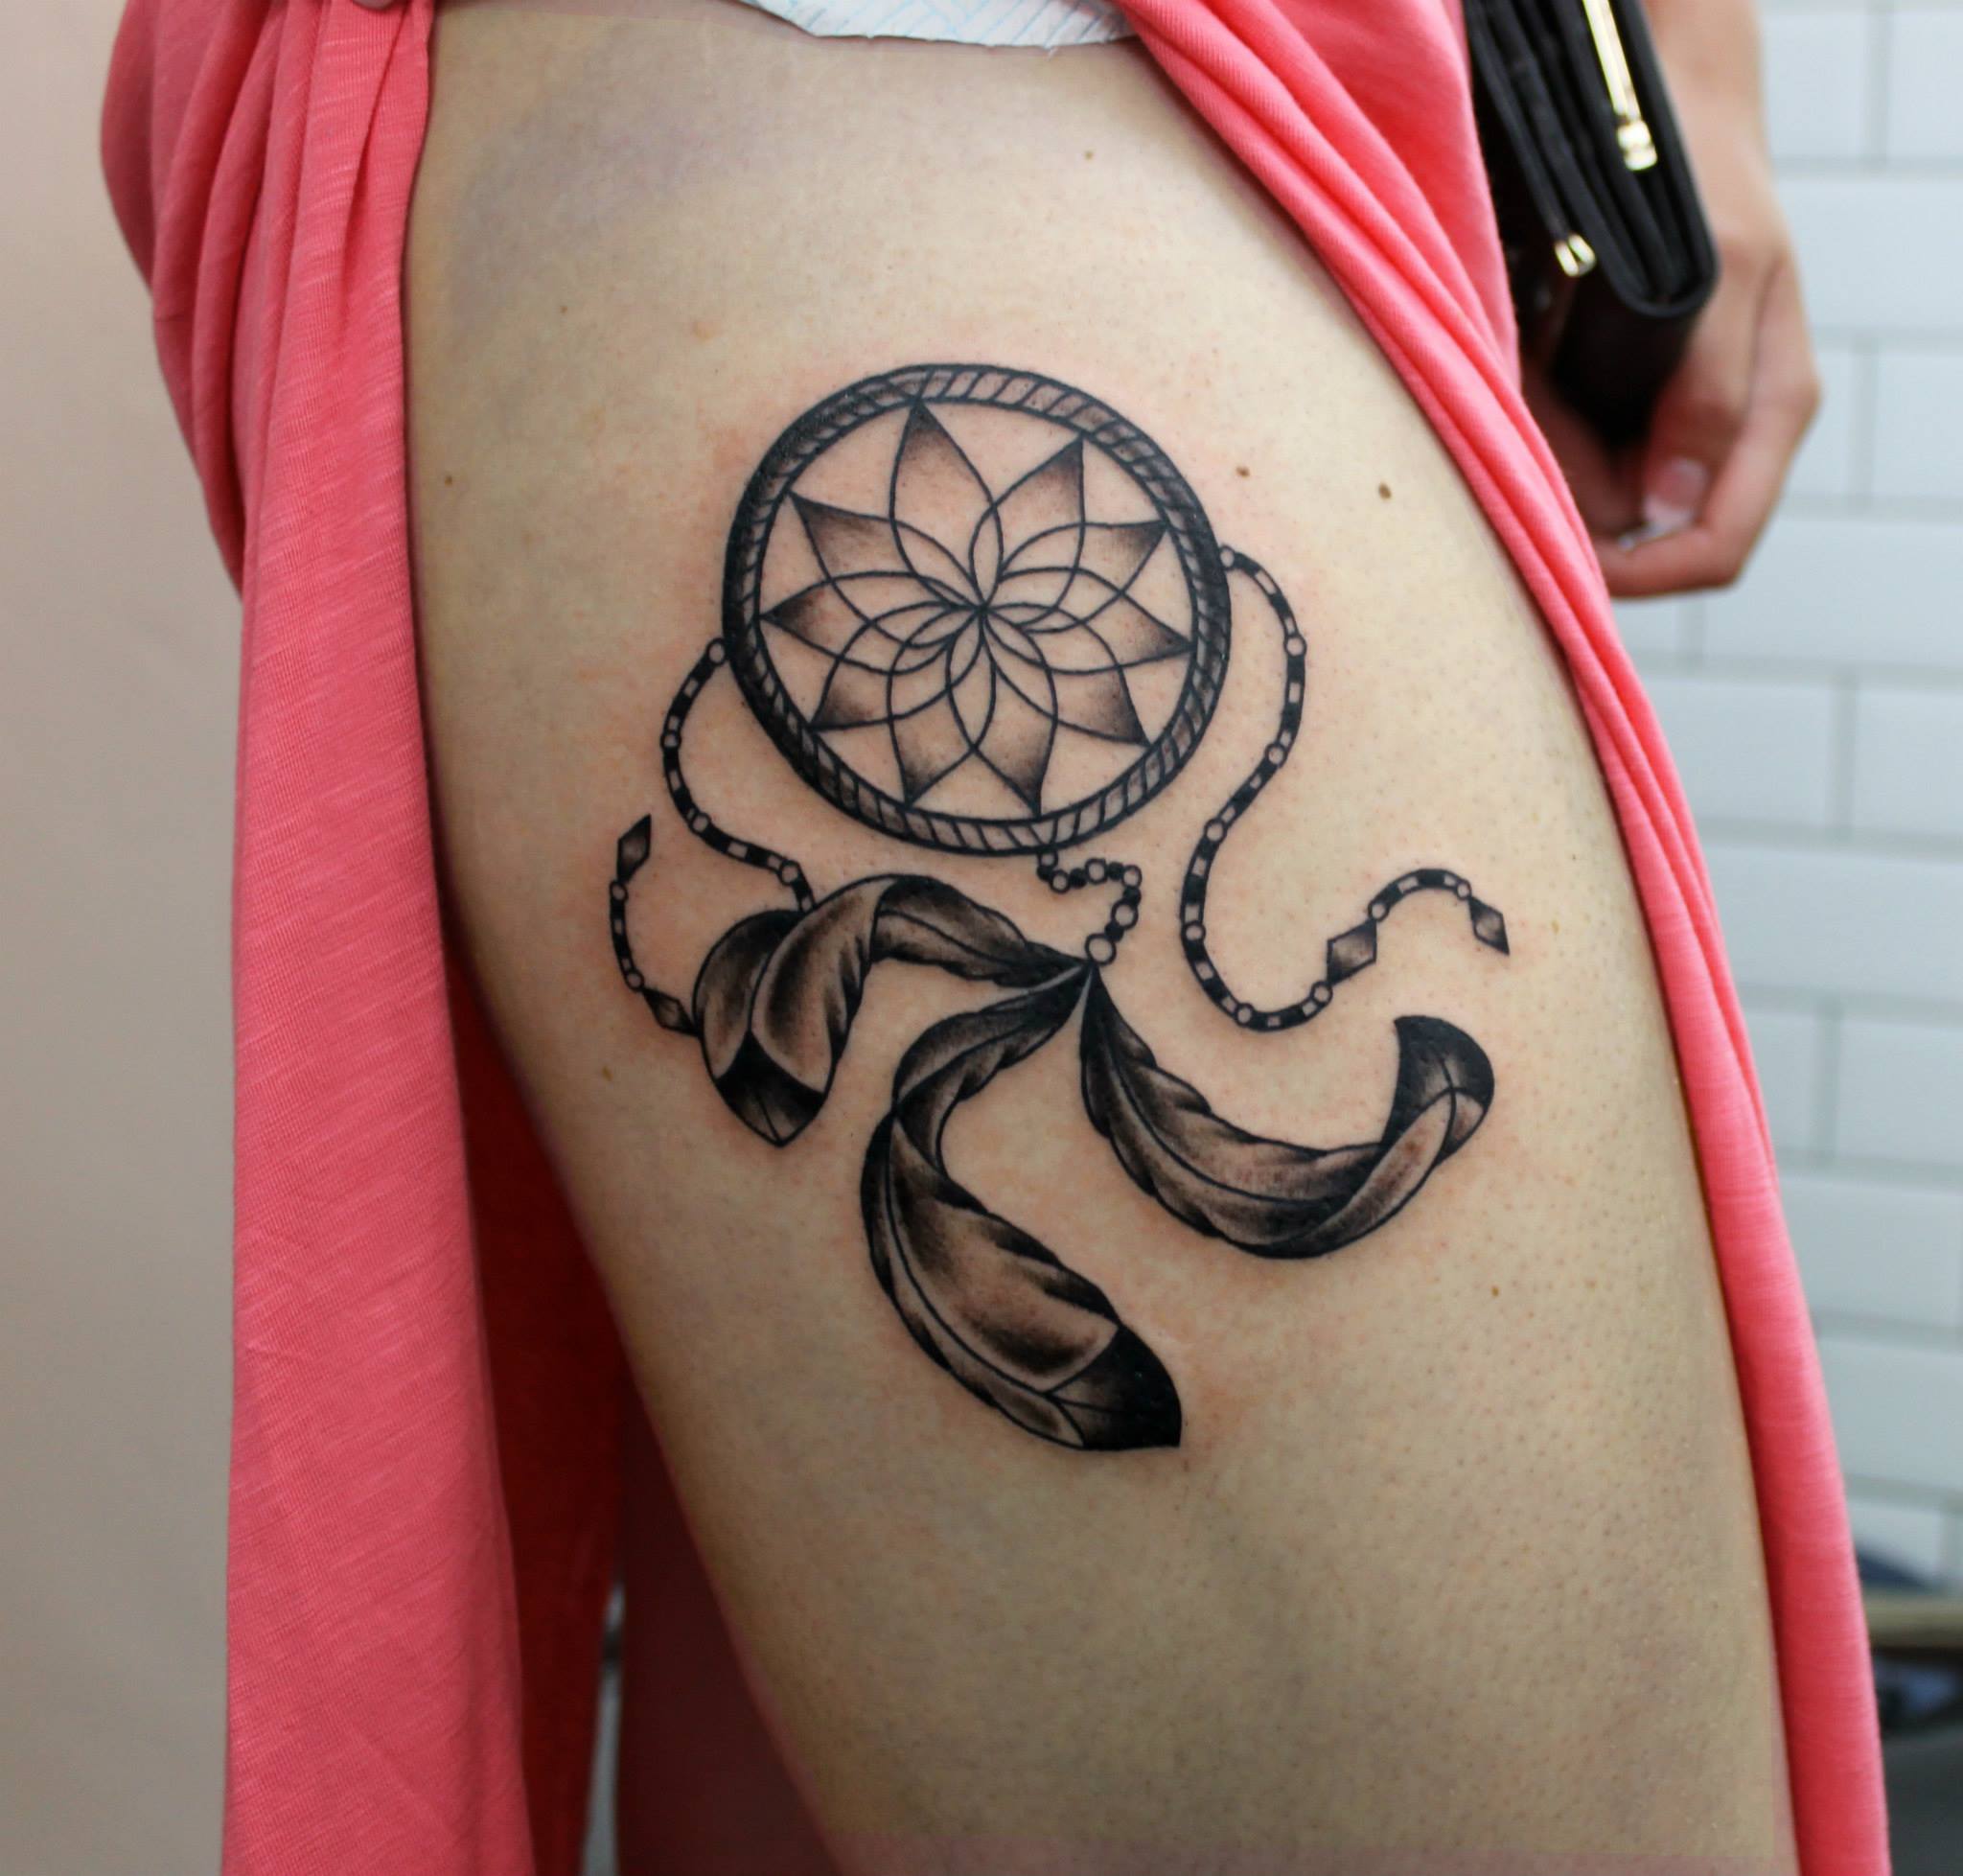 Dreamcatcher Tattoos Designs, Ideas and Meaning | Tattoos ...